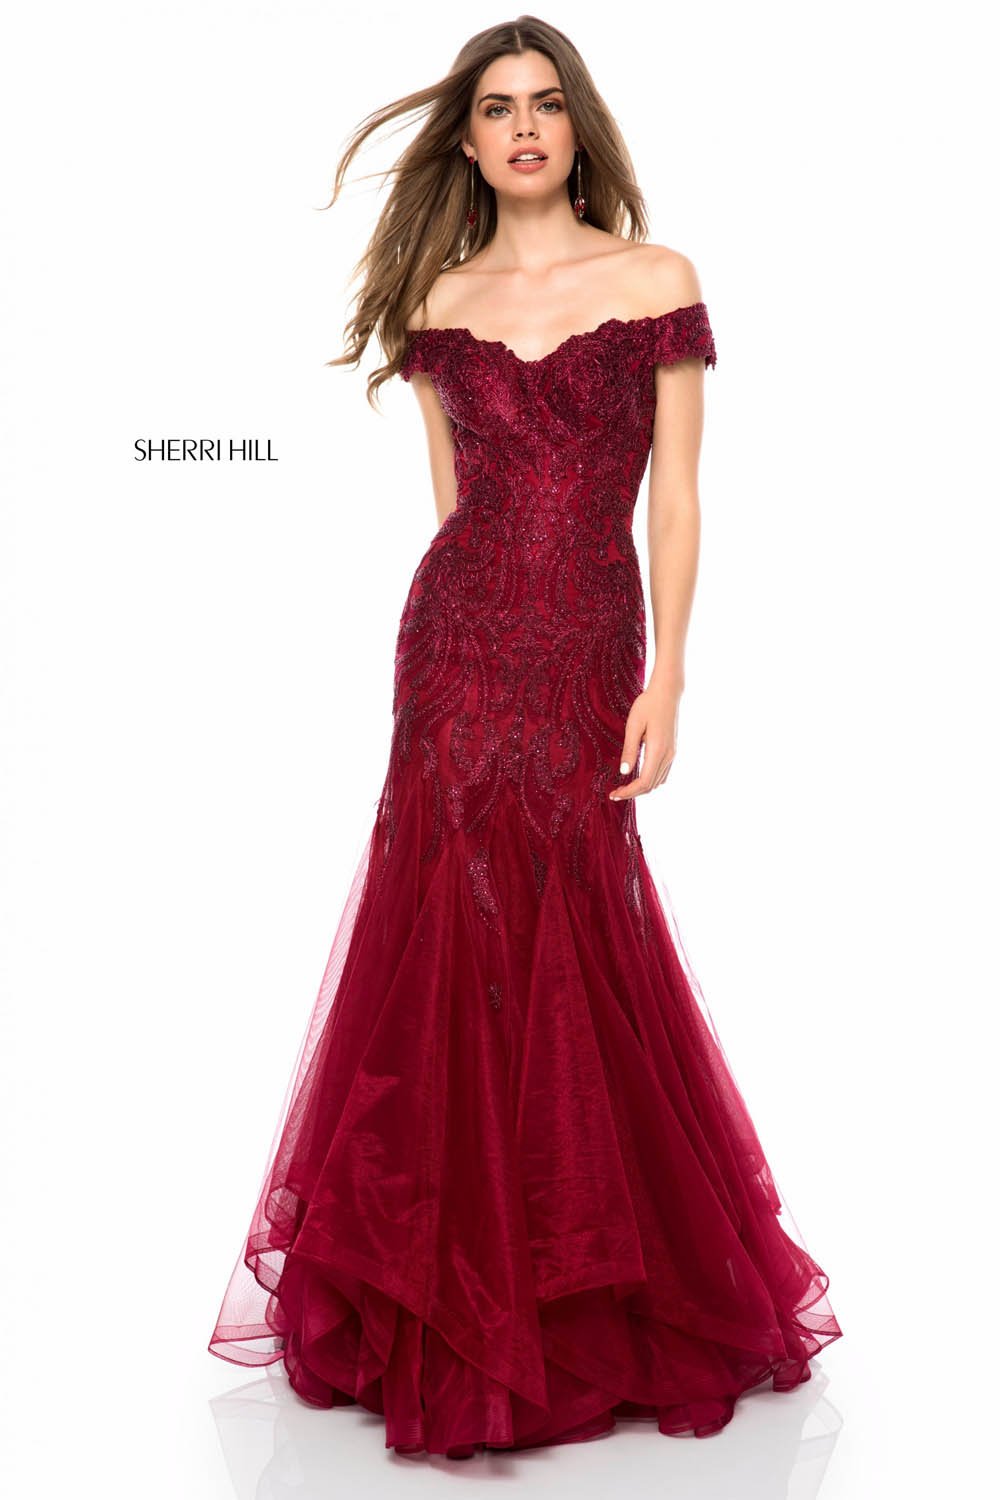 Sherri Hill 51618 dress images in these colors: Gold, Black, Wine, Blush Gold, Gunmetal, Ivory Gold.